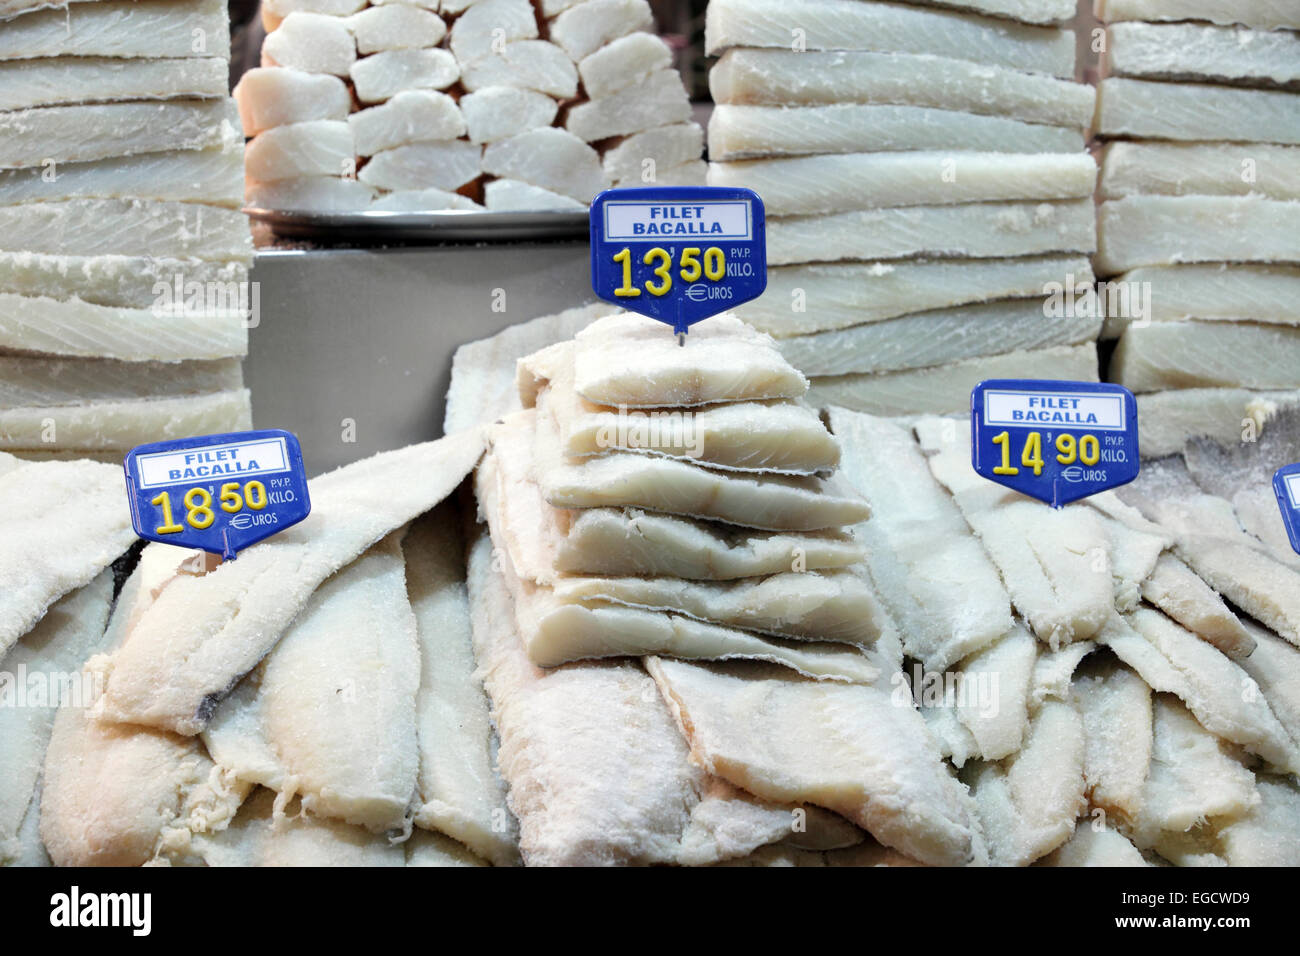 Bacalhau, dried, salted cod, for sale in market Barcelona, Spain Stock Photo